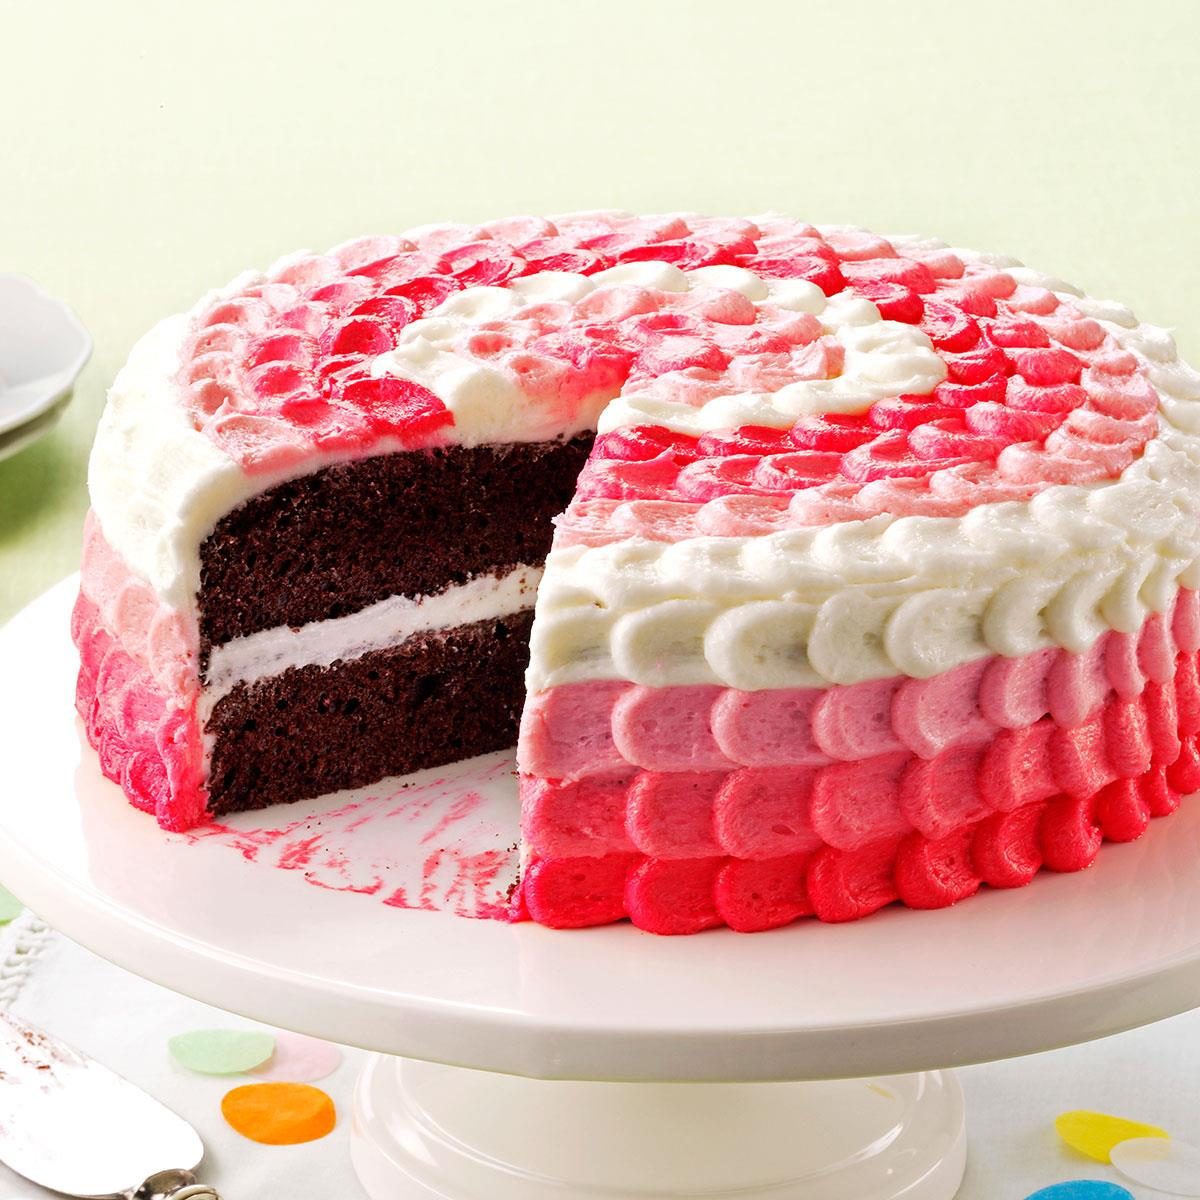 Cake Terms - Icing, Decorating, and Accessories